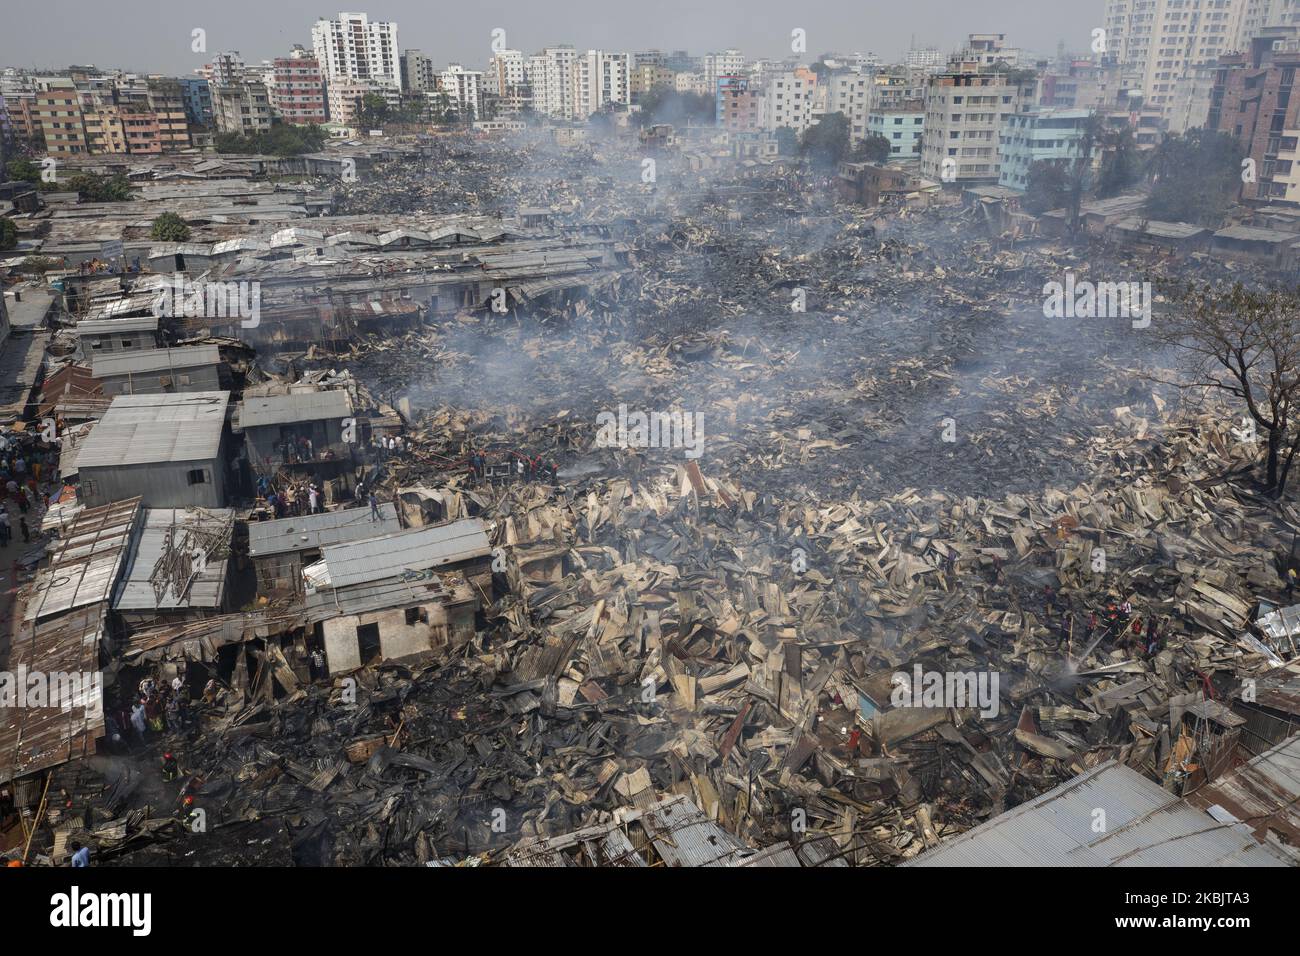 Firefighters with the help of locals work to douse a fire in a slum in Mirpur, Dhaka, Bangladesh. on March 11, 2020. More than 1,000 shanties of the slum were burnt in the fire. (Photo by Ahmed Salahuddin/NurPhoto) Stock Photo